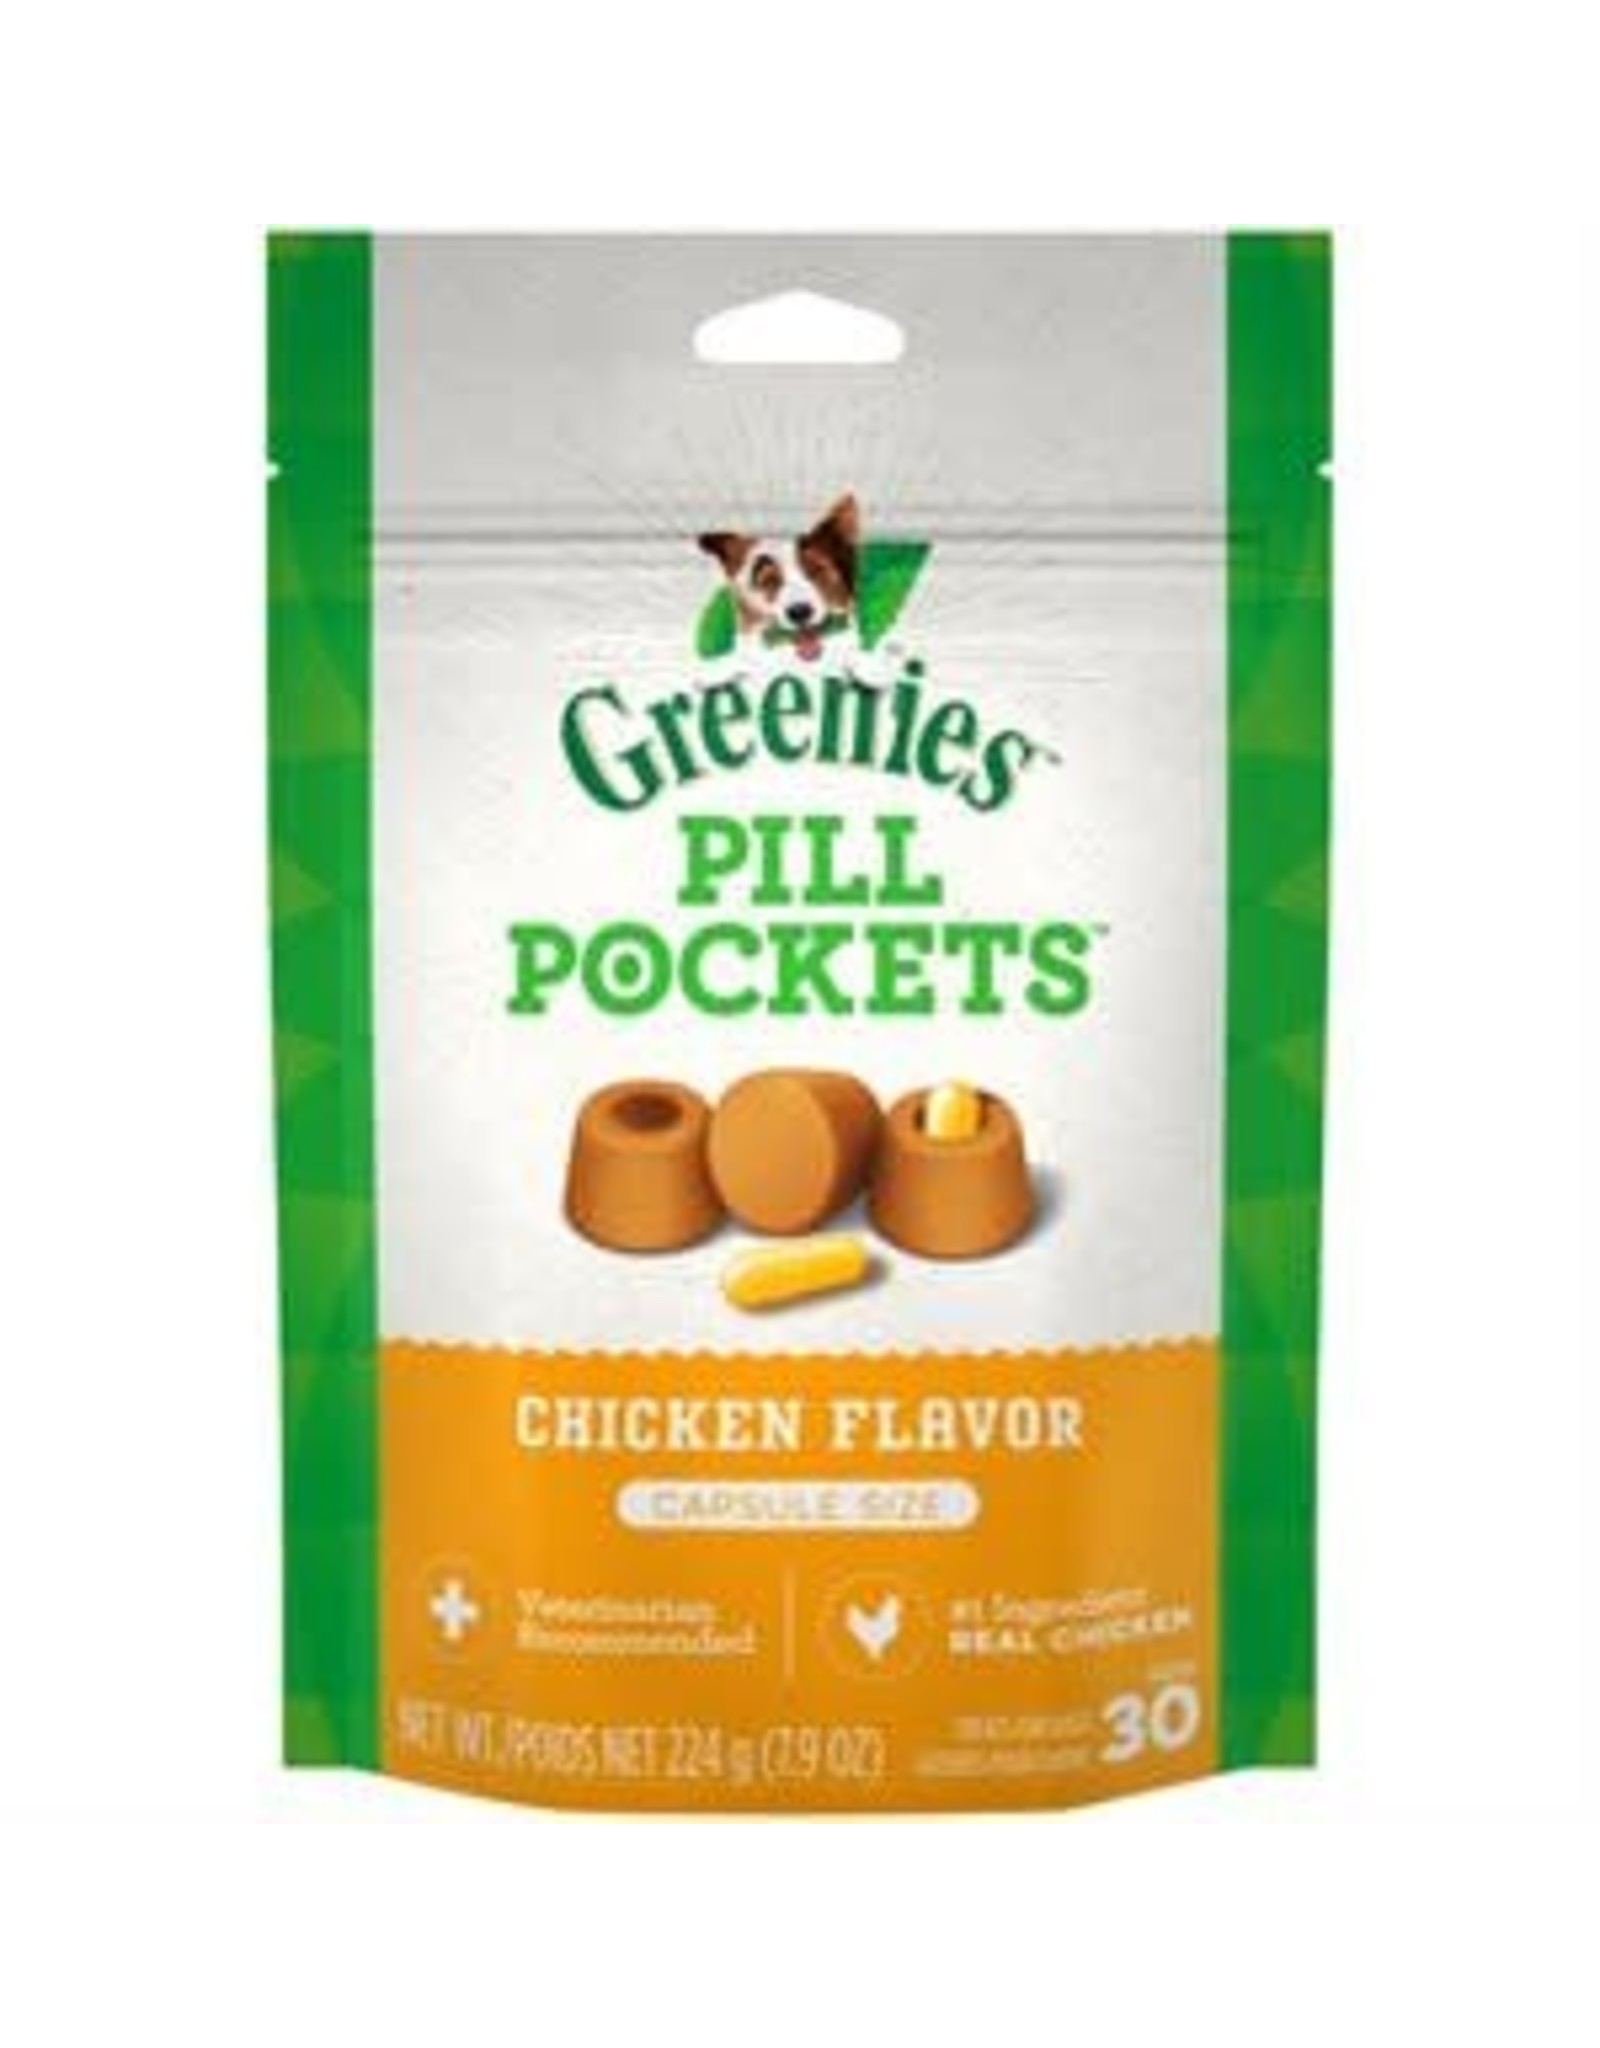 Greenies Greenies Pill Pockets for Dogs 7.9oz - Capsule - Chicken